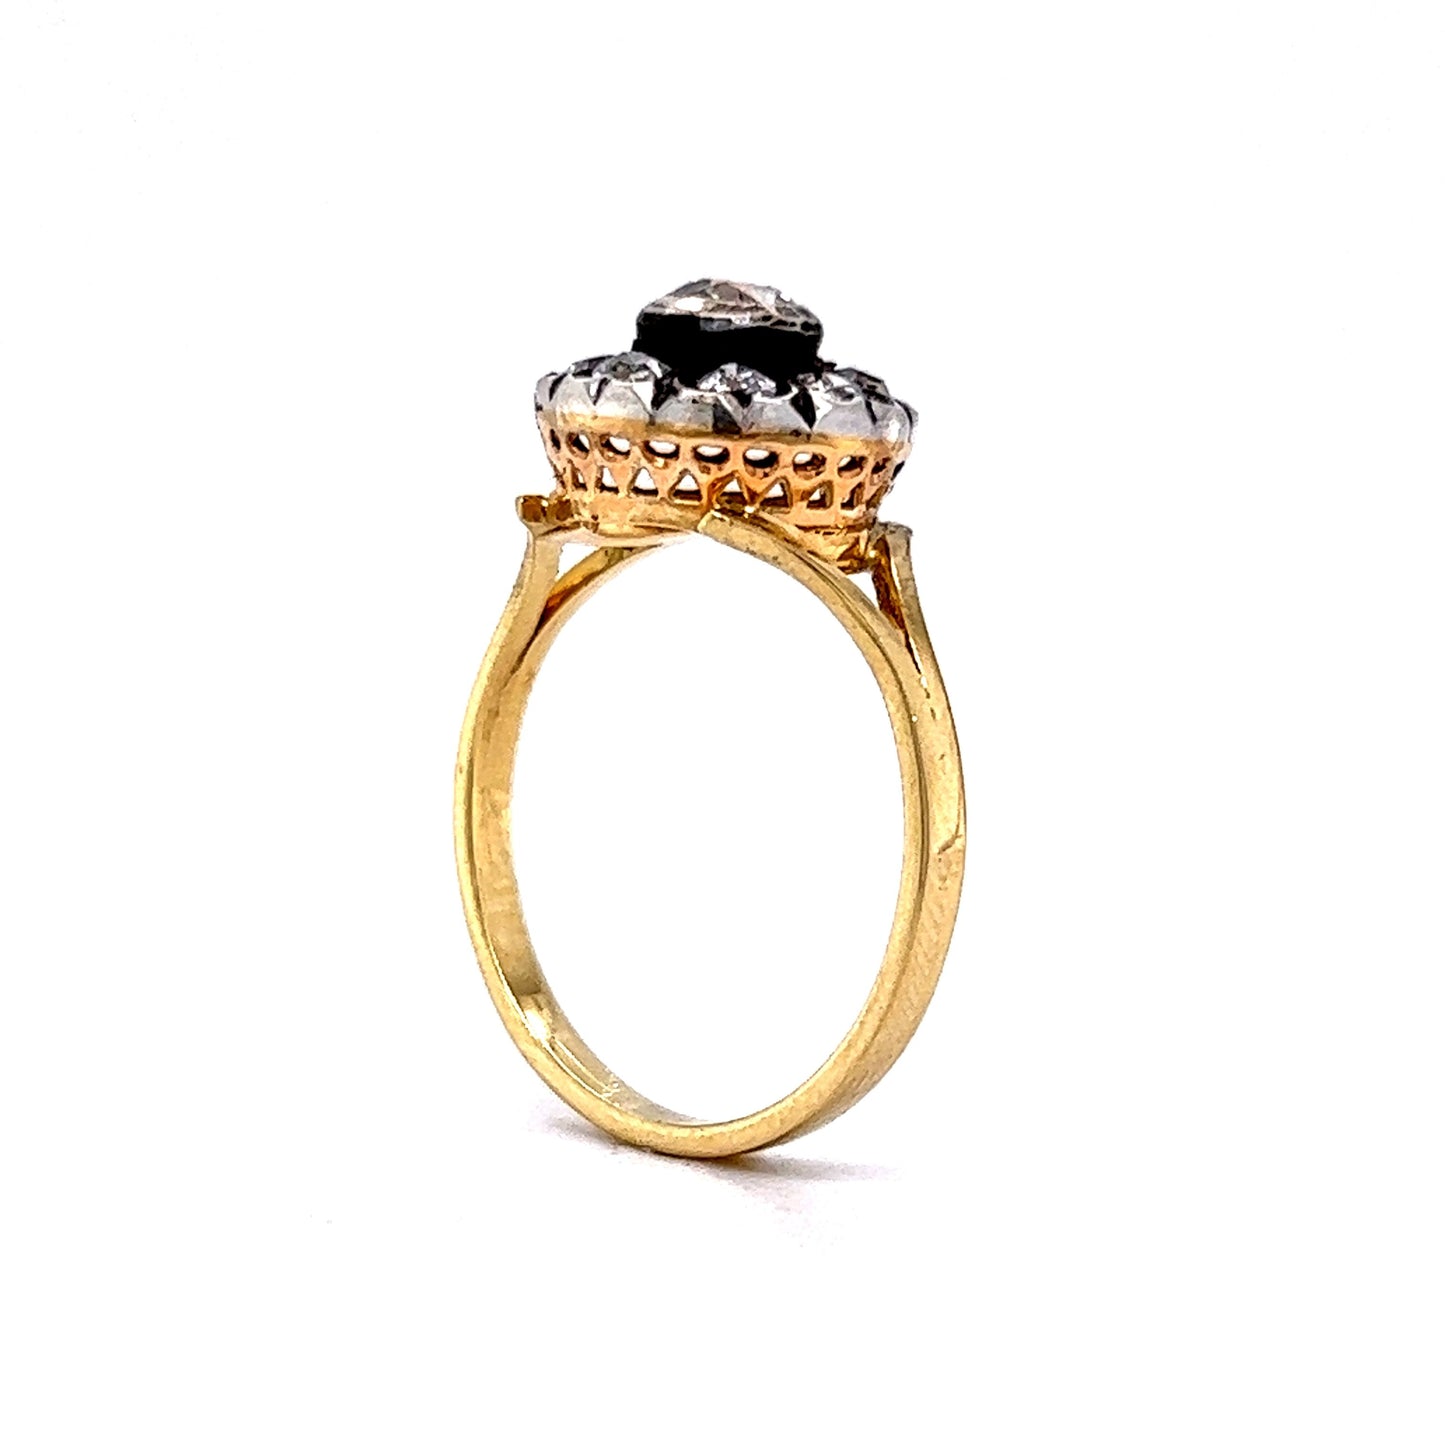 .83 Carat Victorian Diamond Cluster Engagement Ring in 18k